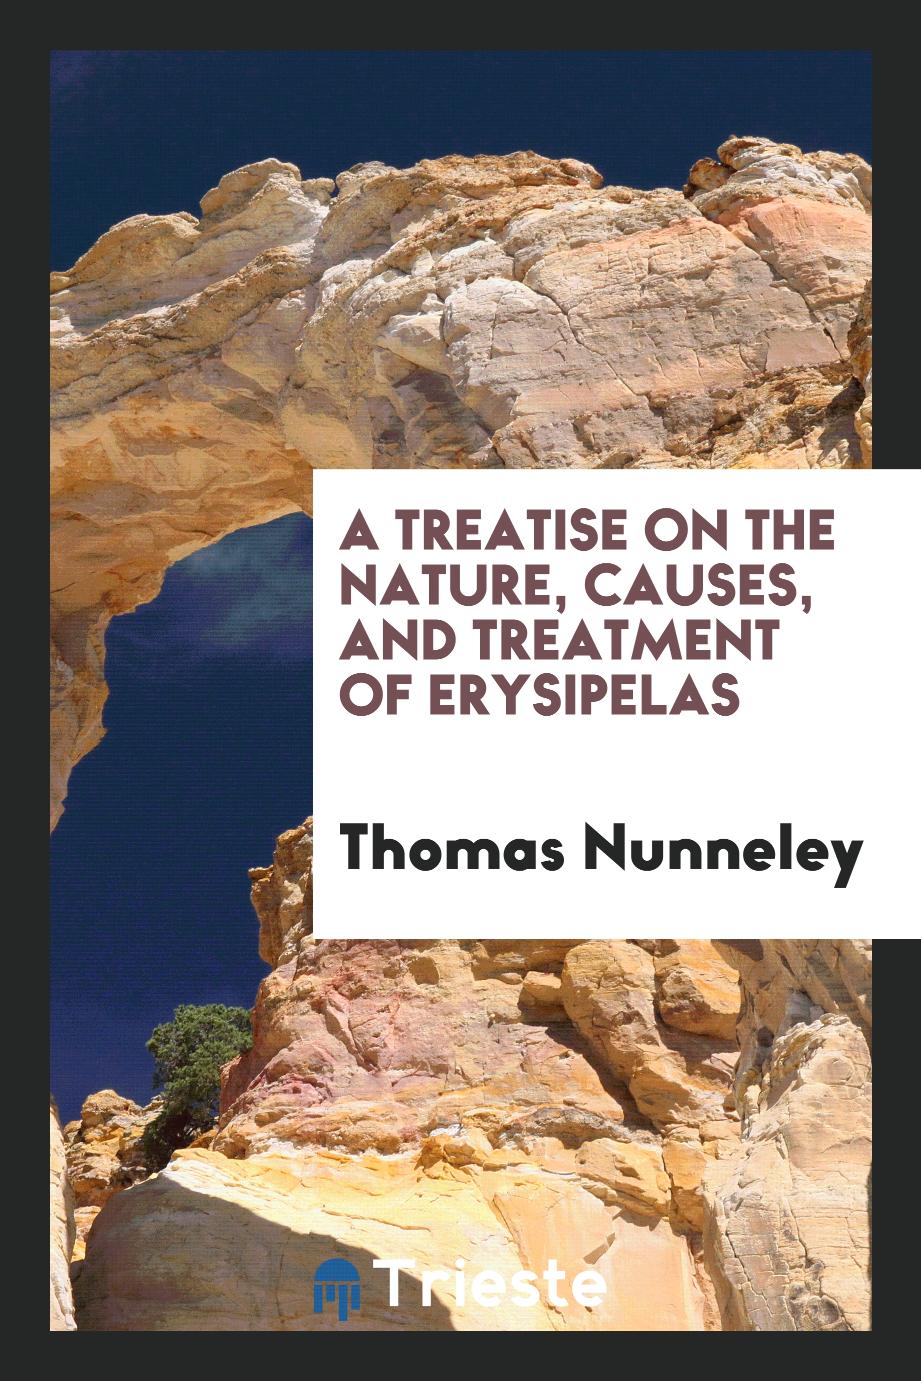 A Treatise on the Nature, Causes, and Treatment of Erysipelas